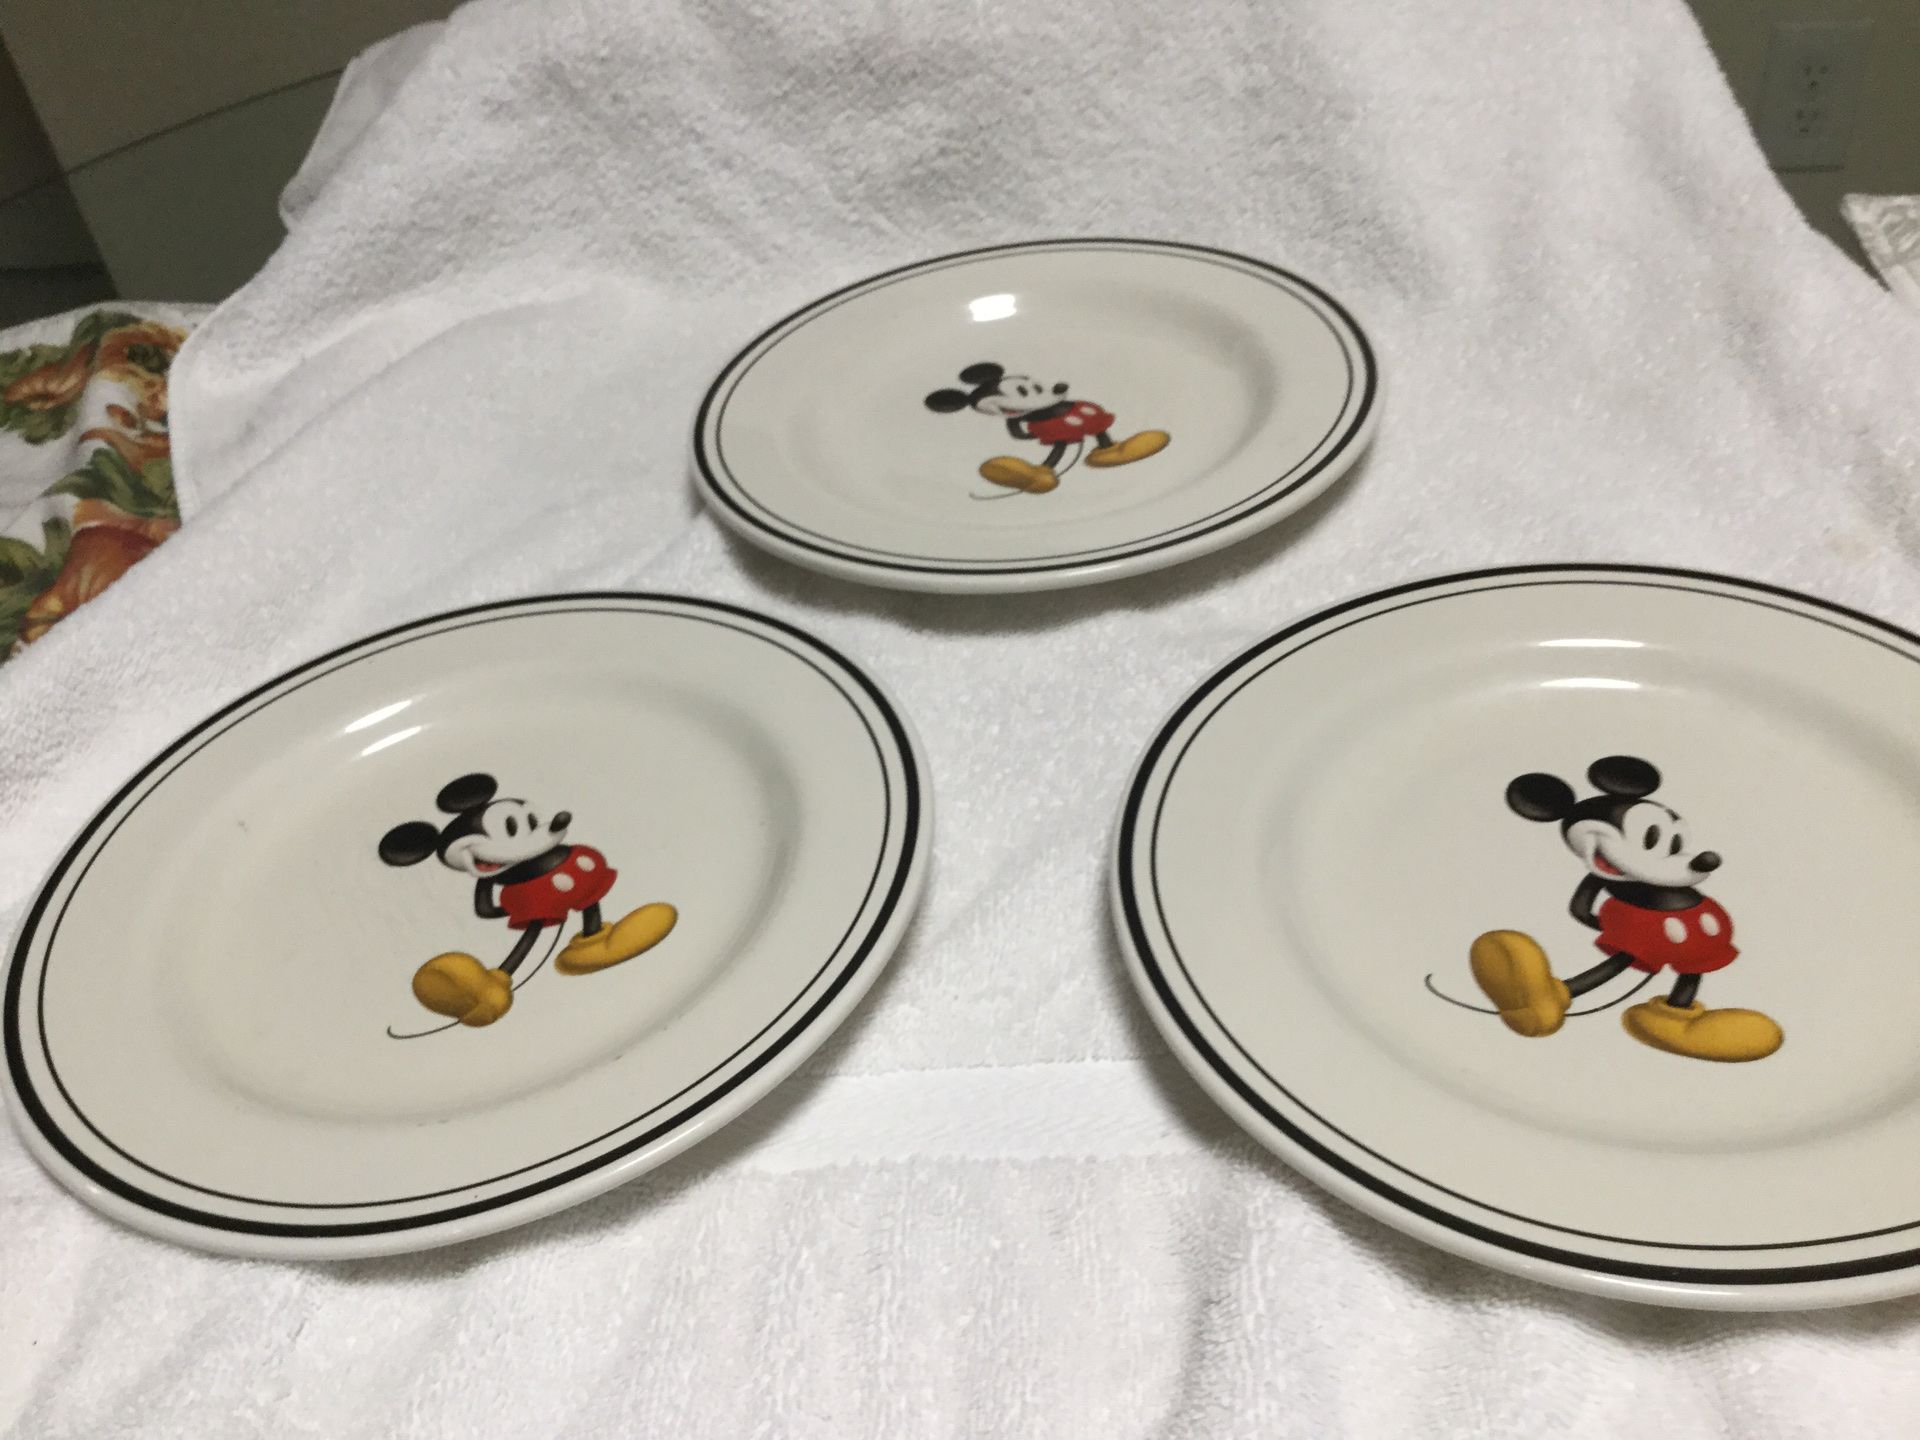 3 disney Mickey Mouse plates 20.00 for alllowered price see ad